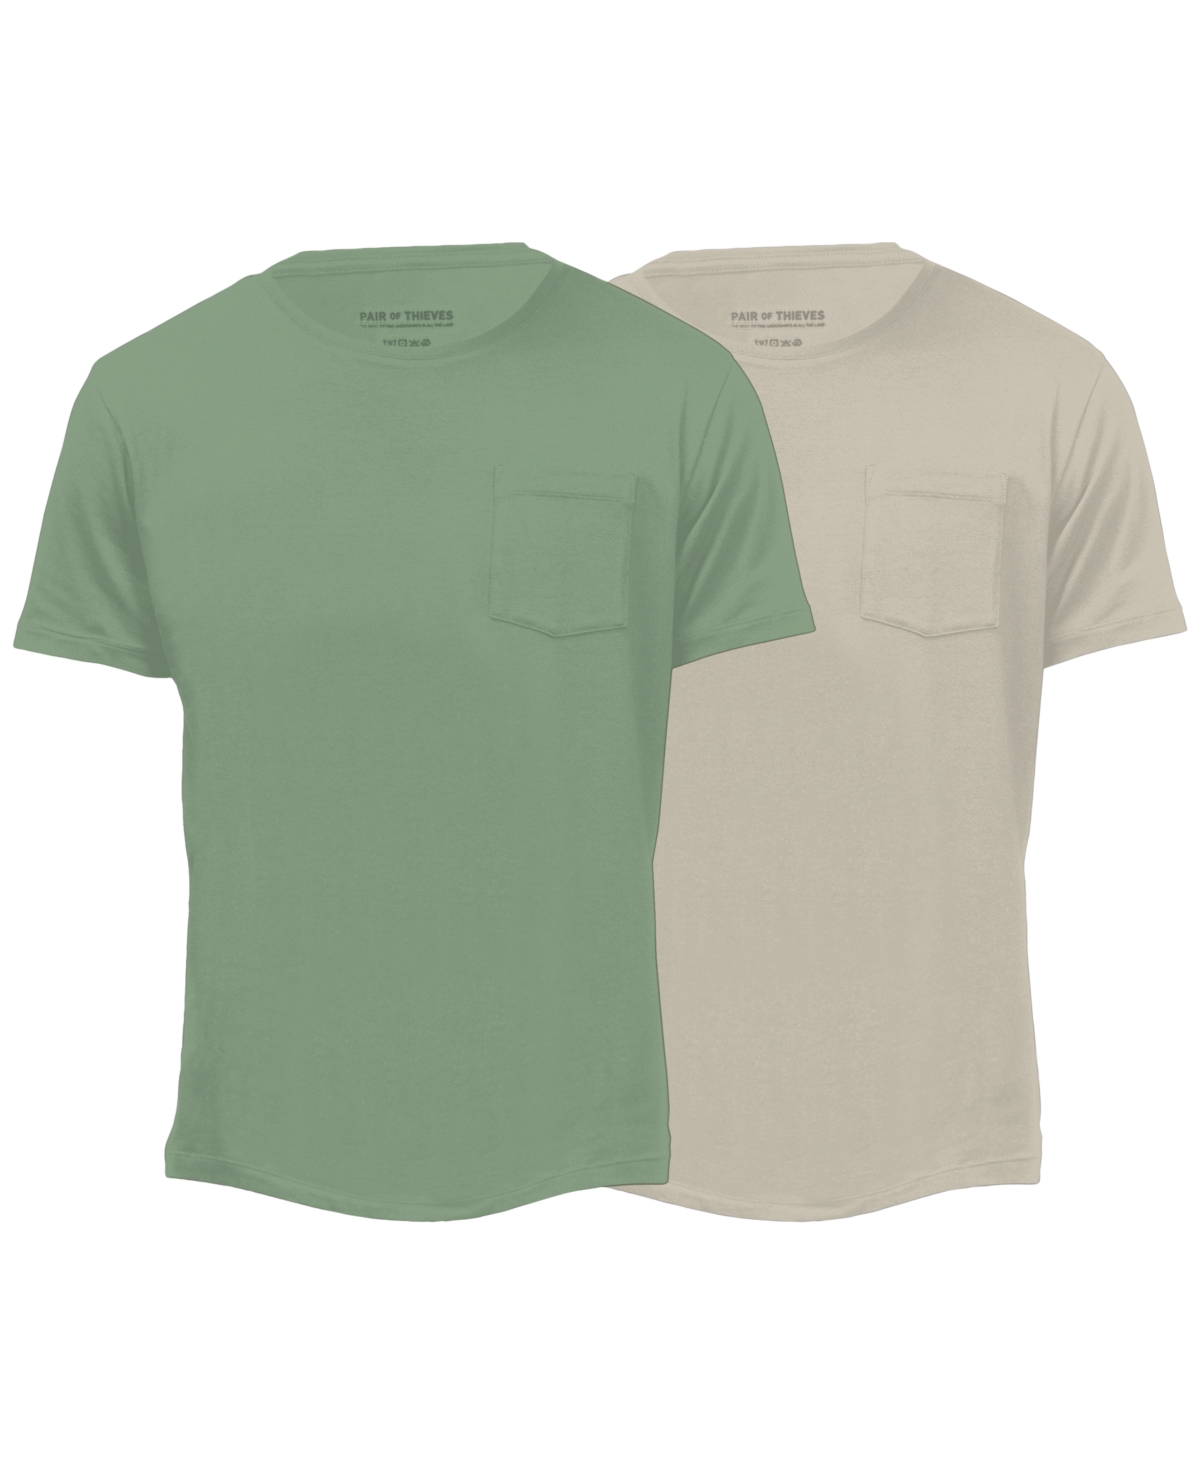 Pair Of Thieves Men's Rfe Supersoft Pocket T-shirts - 2pk. In Sage